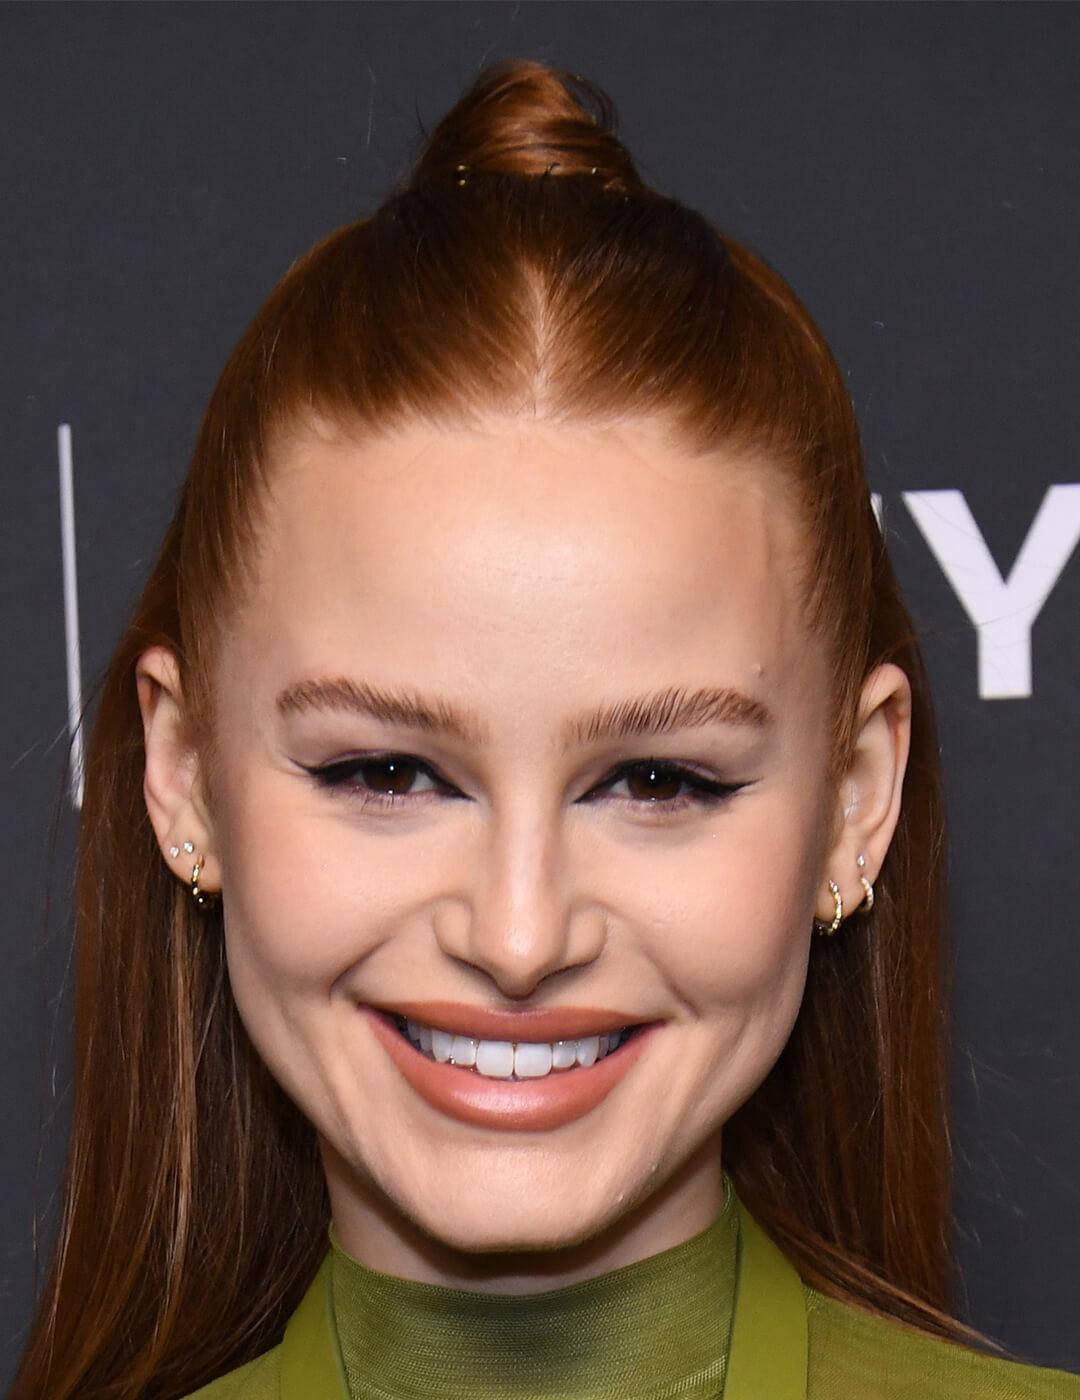 Madelaine Petsch looking glam with a dramatic cat-eye look paired with a slick semi-high bun hairstyle